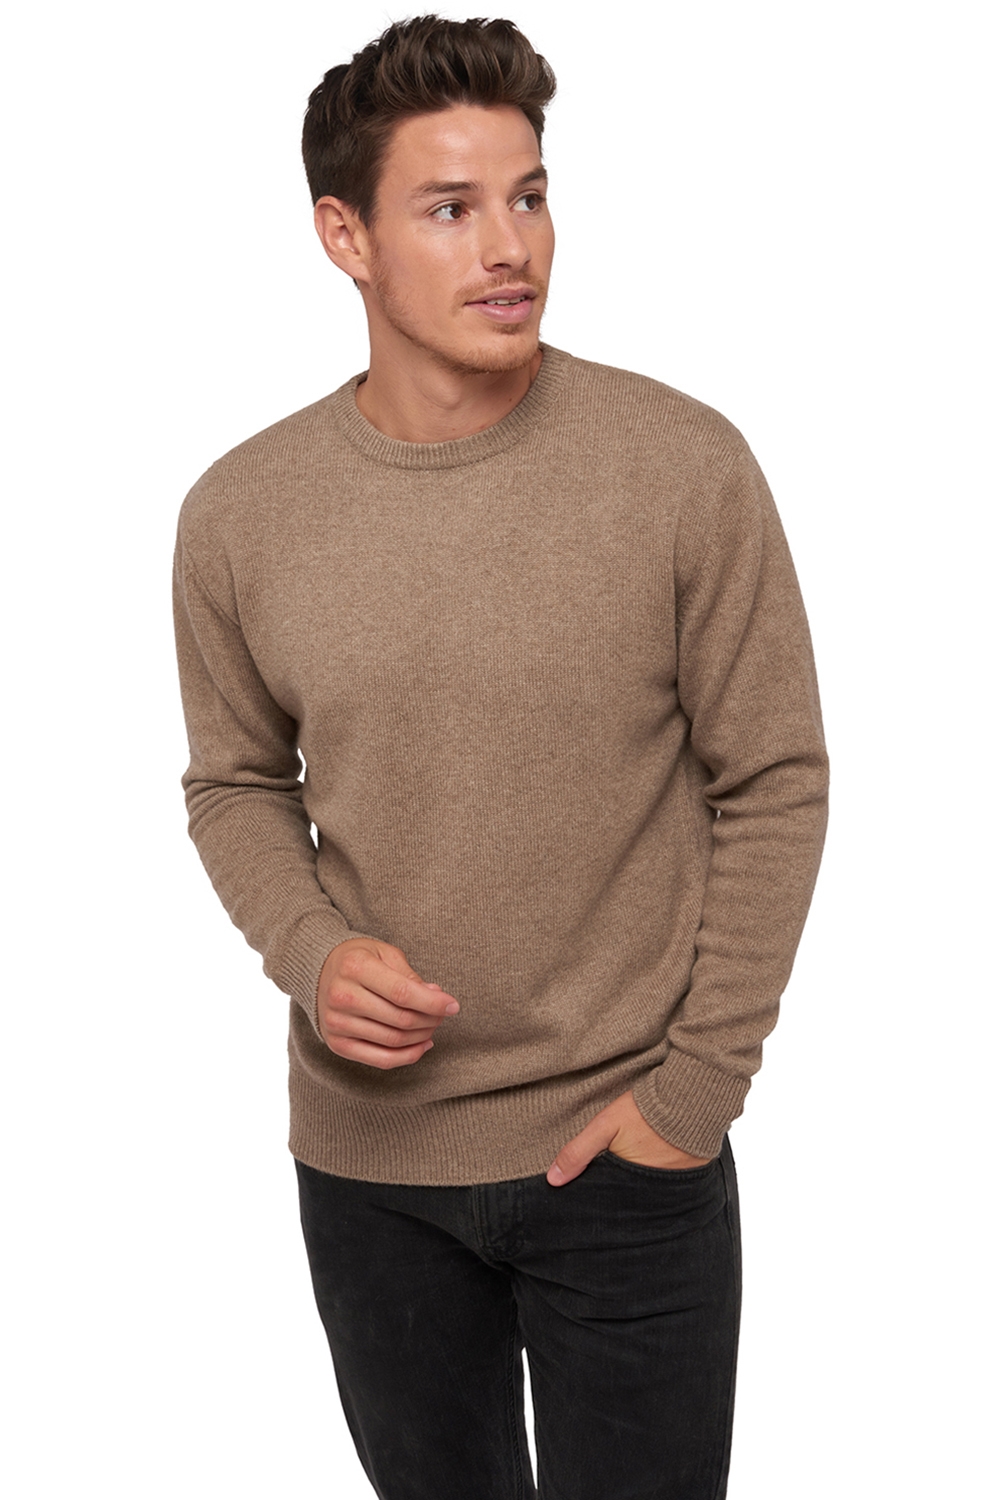 Cachemire Naturel pull homme cachemire couleur naturelle natural ness 4f natural brown xl